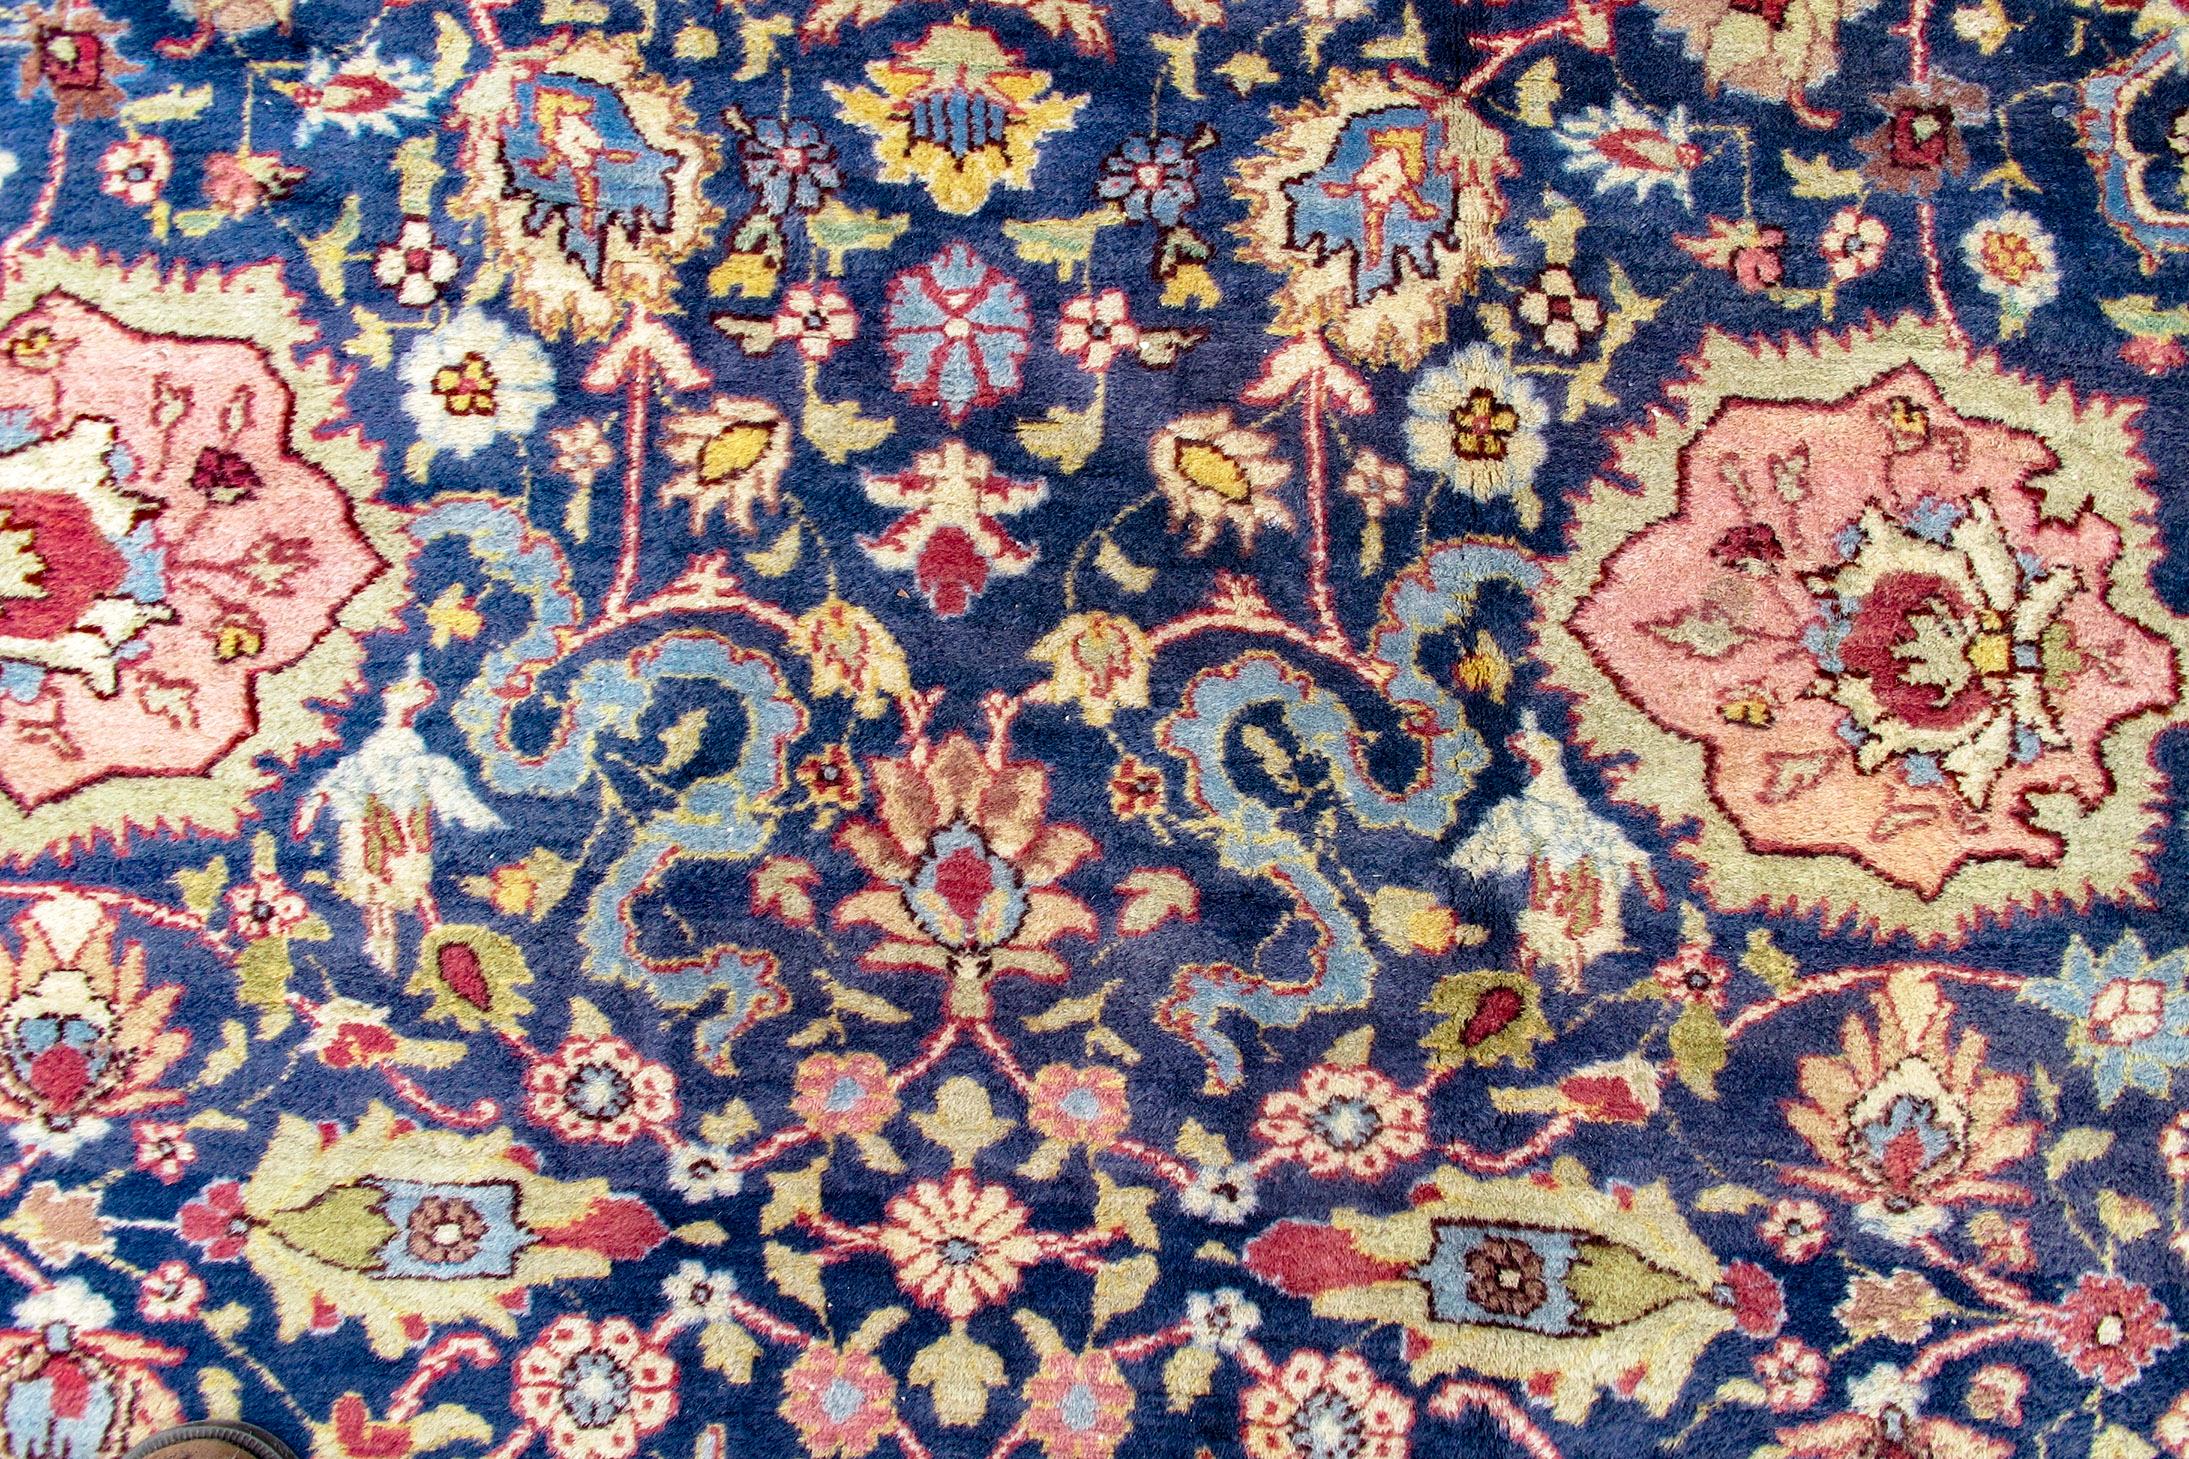 Antique Persian Hereke Carpet, c. 1900 In Excellent Condition For Sale In San Francisco, CA